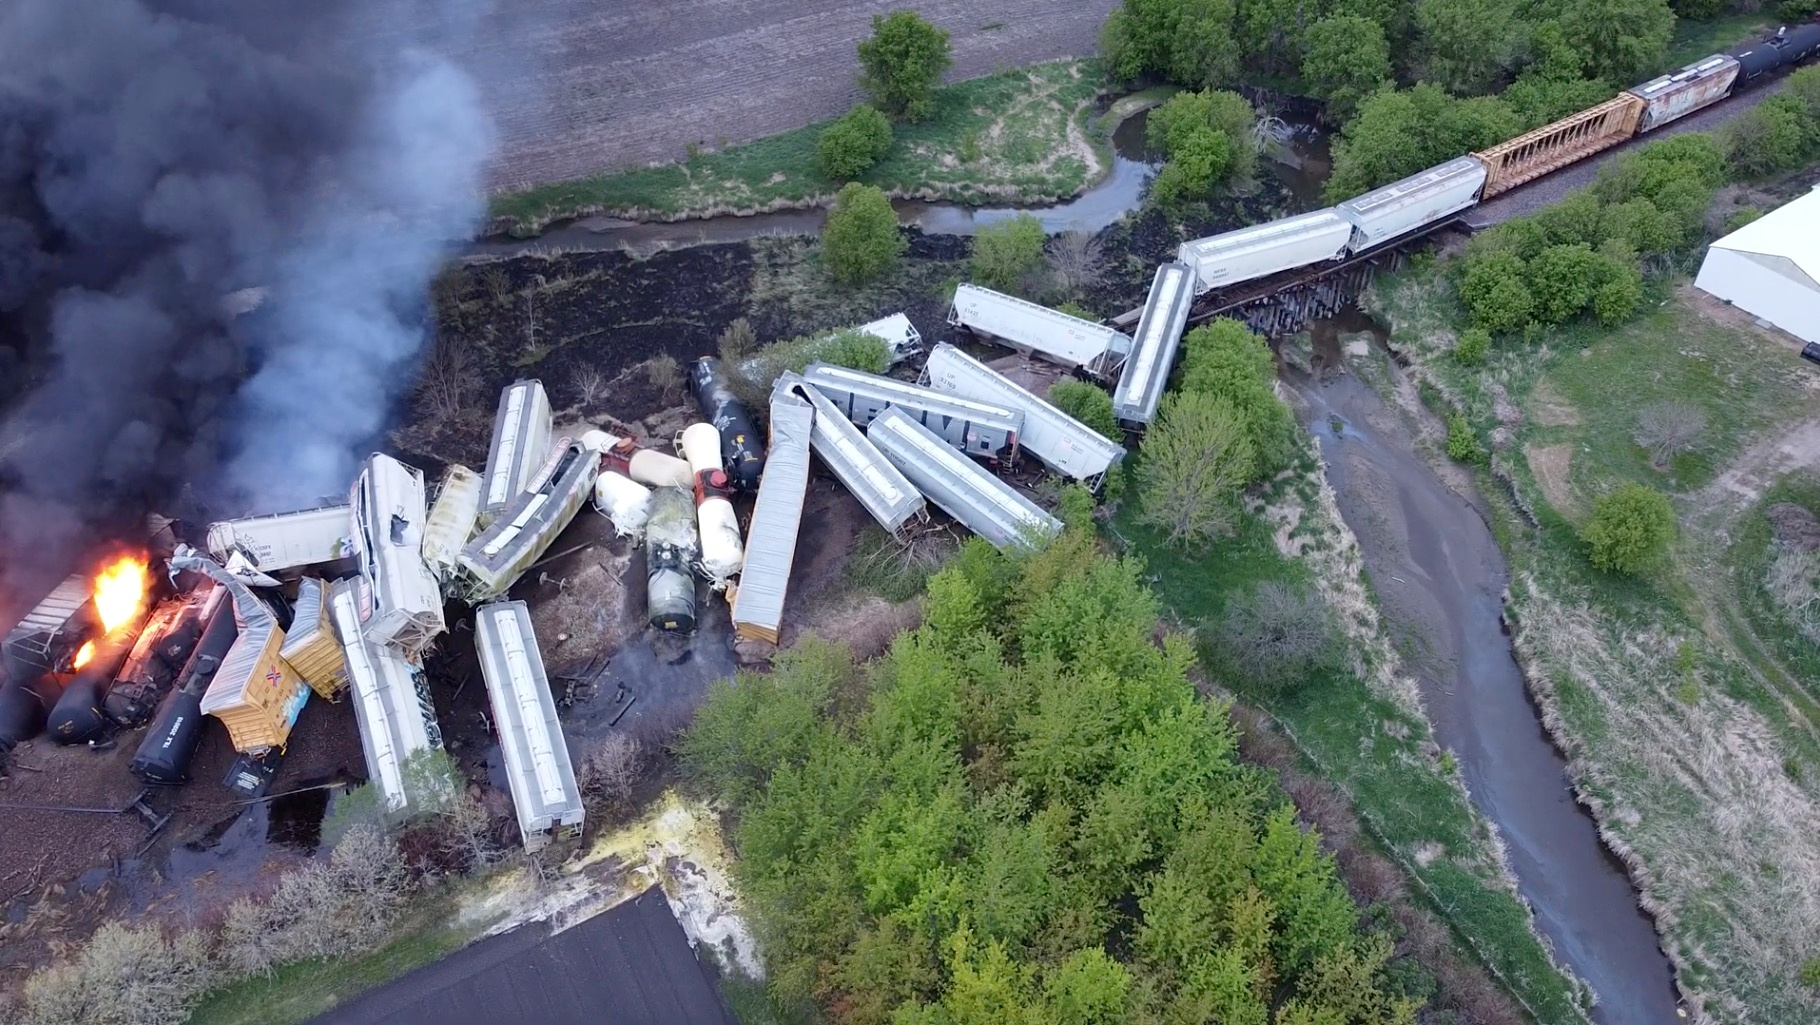 Fire is seen on a Union Pacific train carrying hazardous material that has derailed in Sibley, Iowa, U.S., in this still frame obtained from social media drone video dated May 16, 2021. NATHAN MINTEN/via REUTERS 